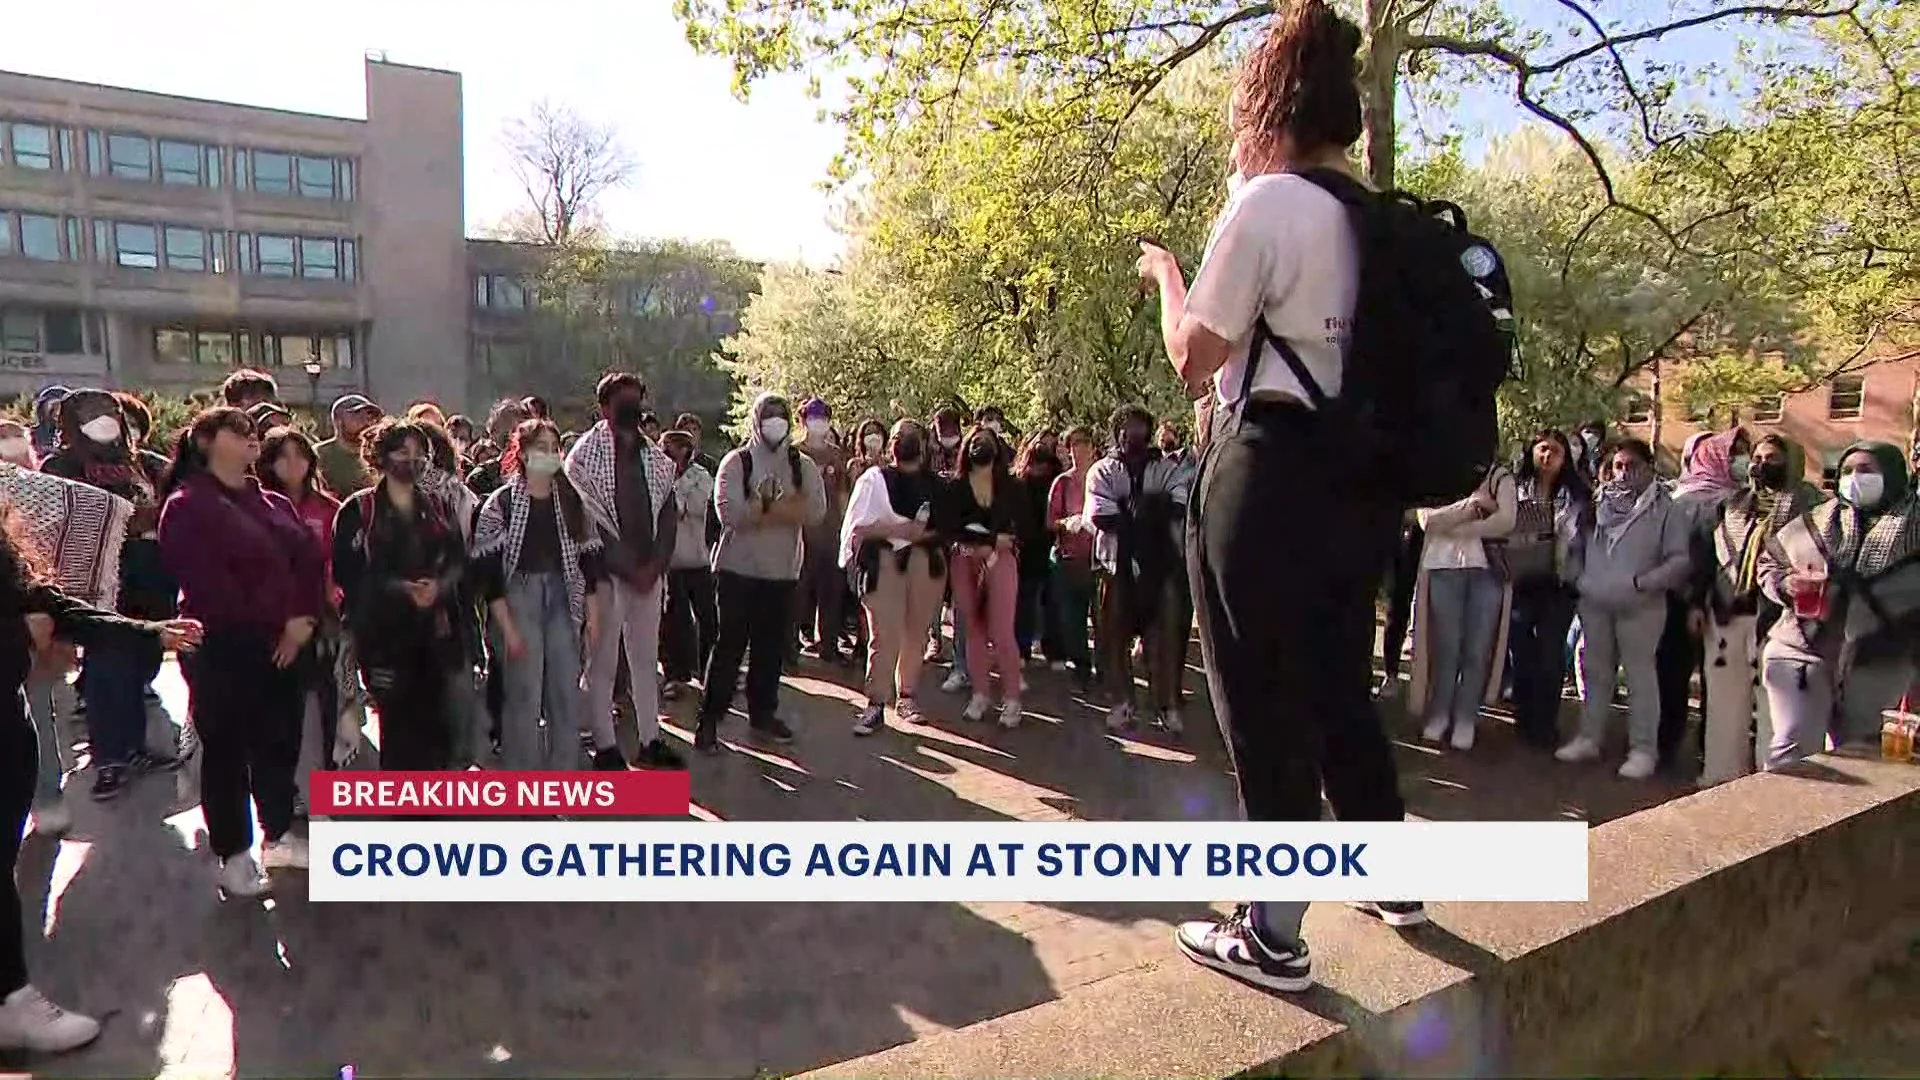 Crowds again gathers at Stony Brook University following night of 29 arrests during pro-Palestinian protest